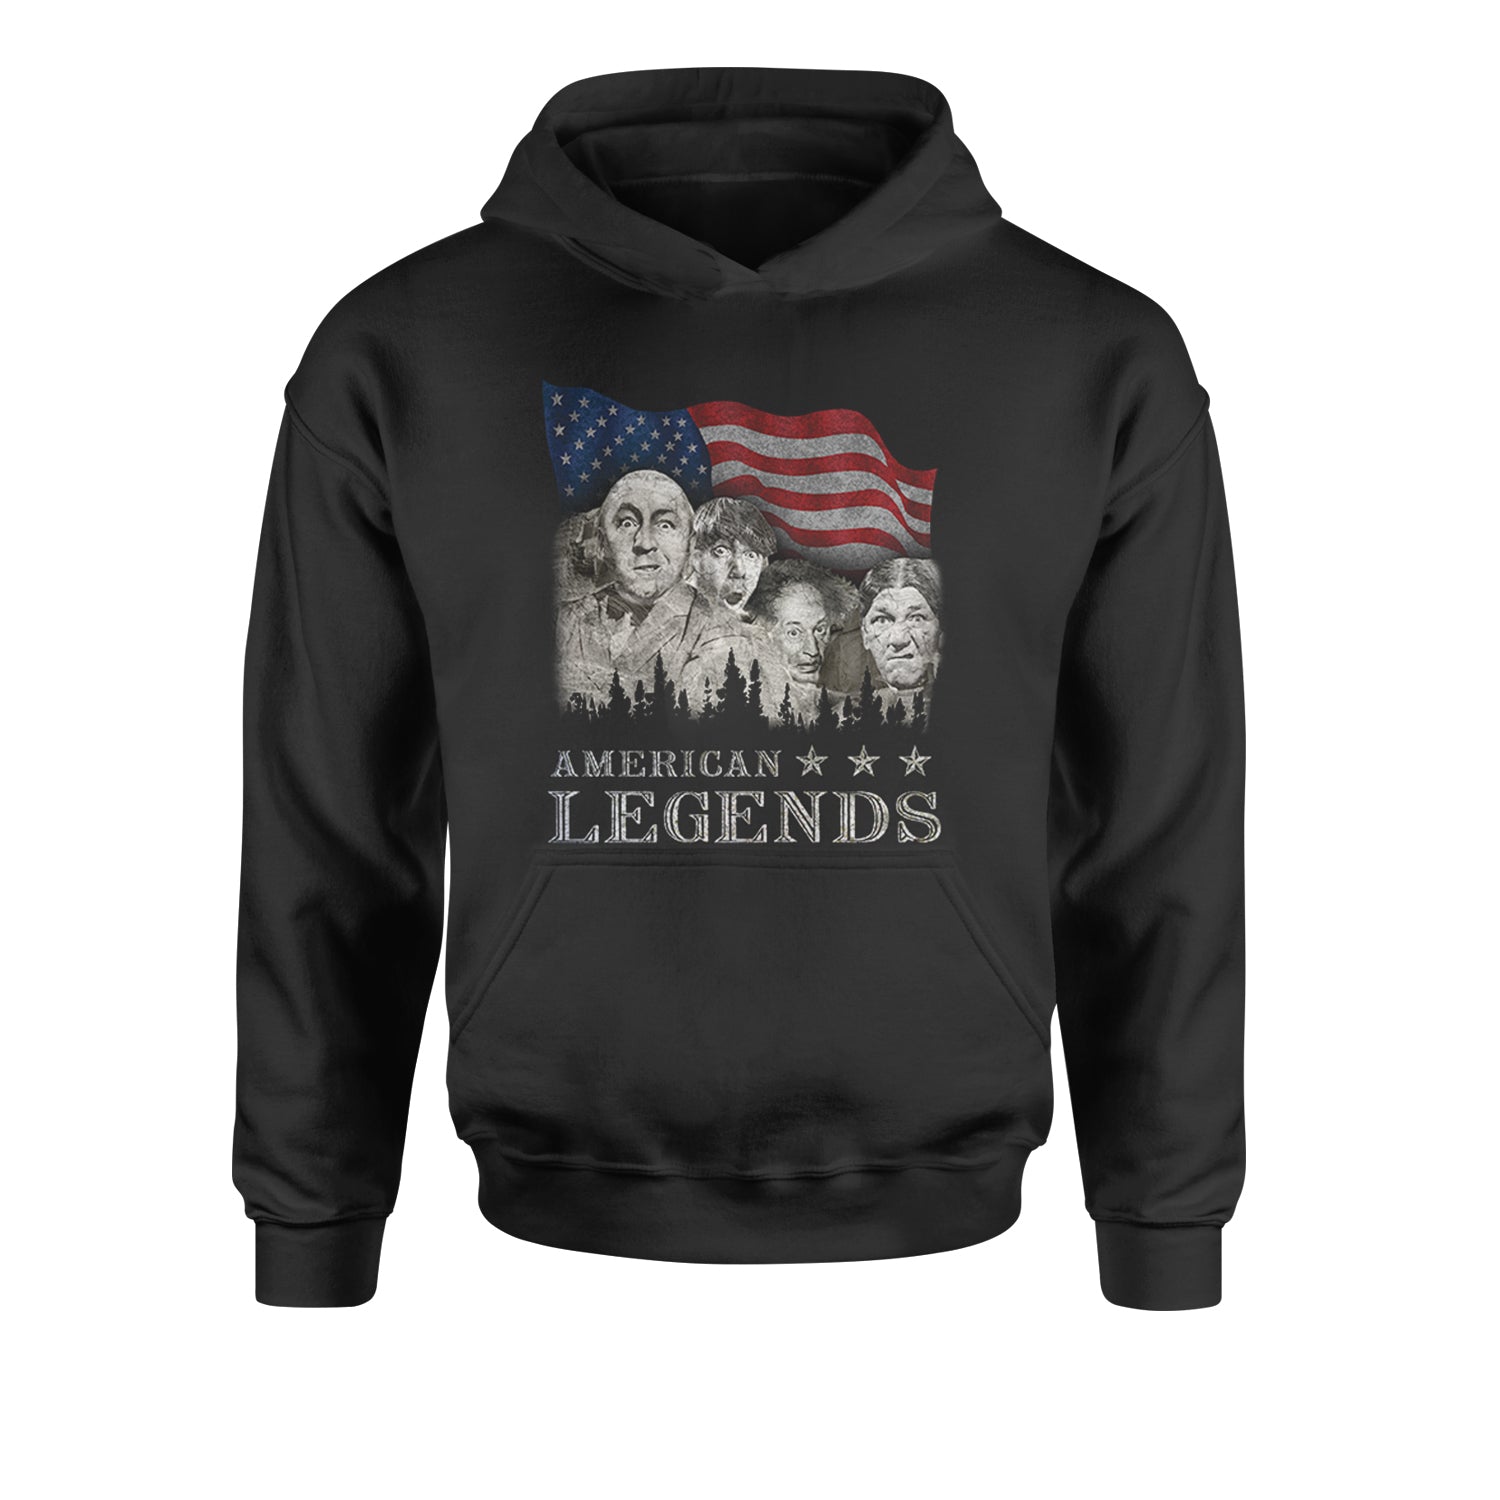 Mount RushMorons 3 Stooges Classic Retro TV Comedy Youth-Sized Hoodie